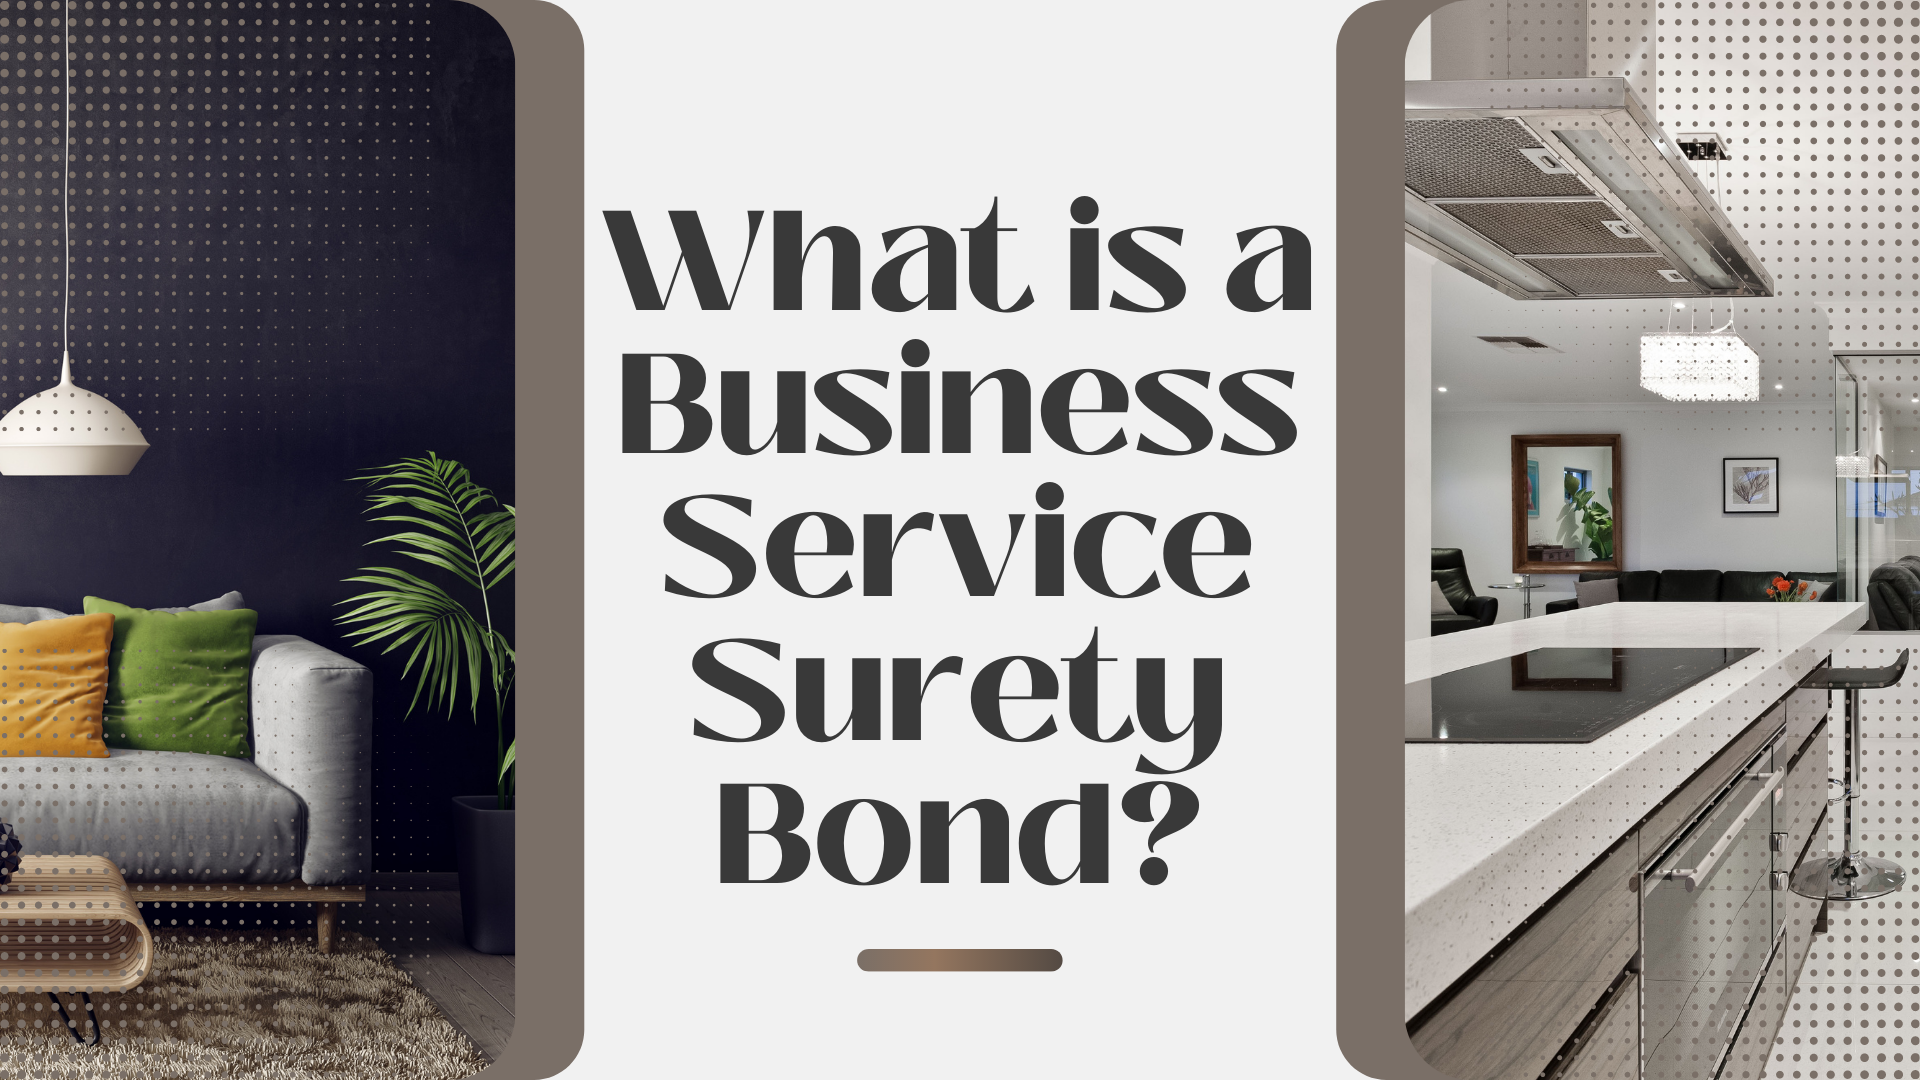 surety bond - Is a Business Service Bond the right Bond for my Business - home interior